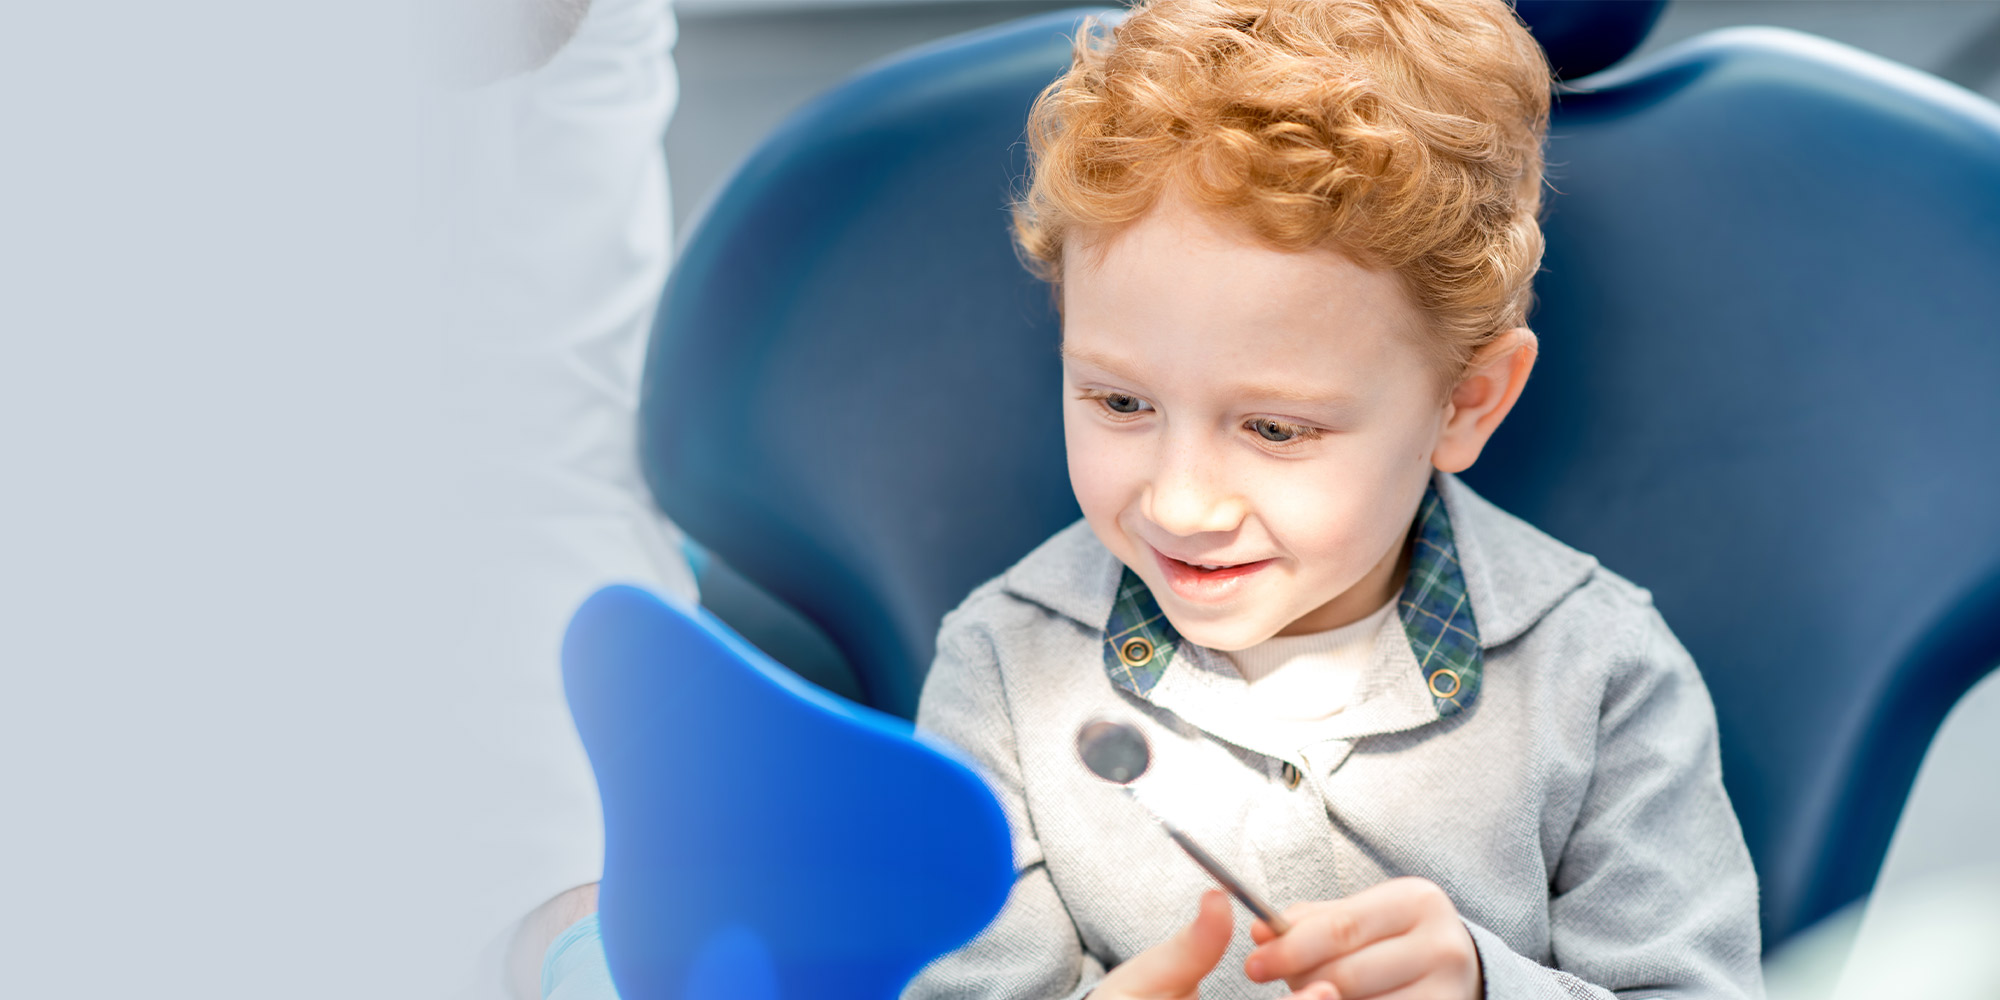 Kid with red hair sitting in dental chair learning about dental tools